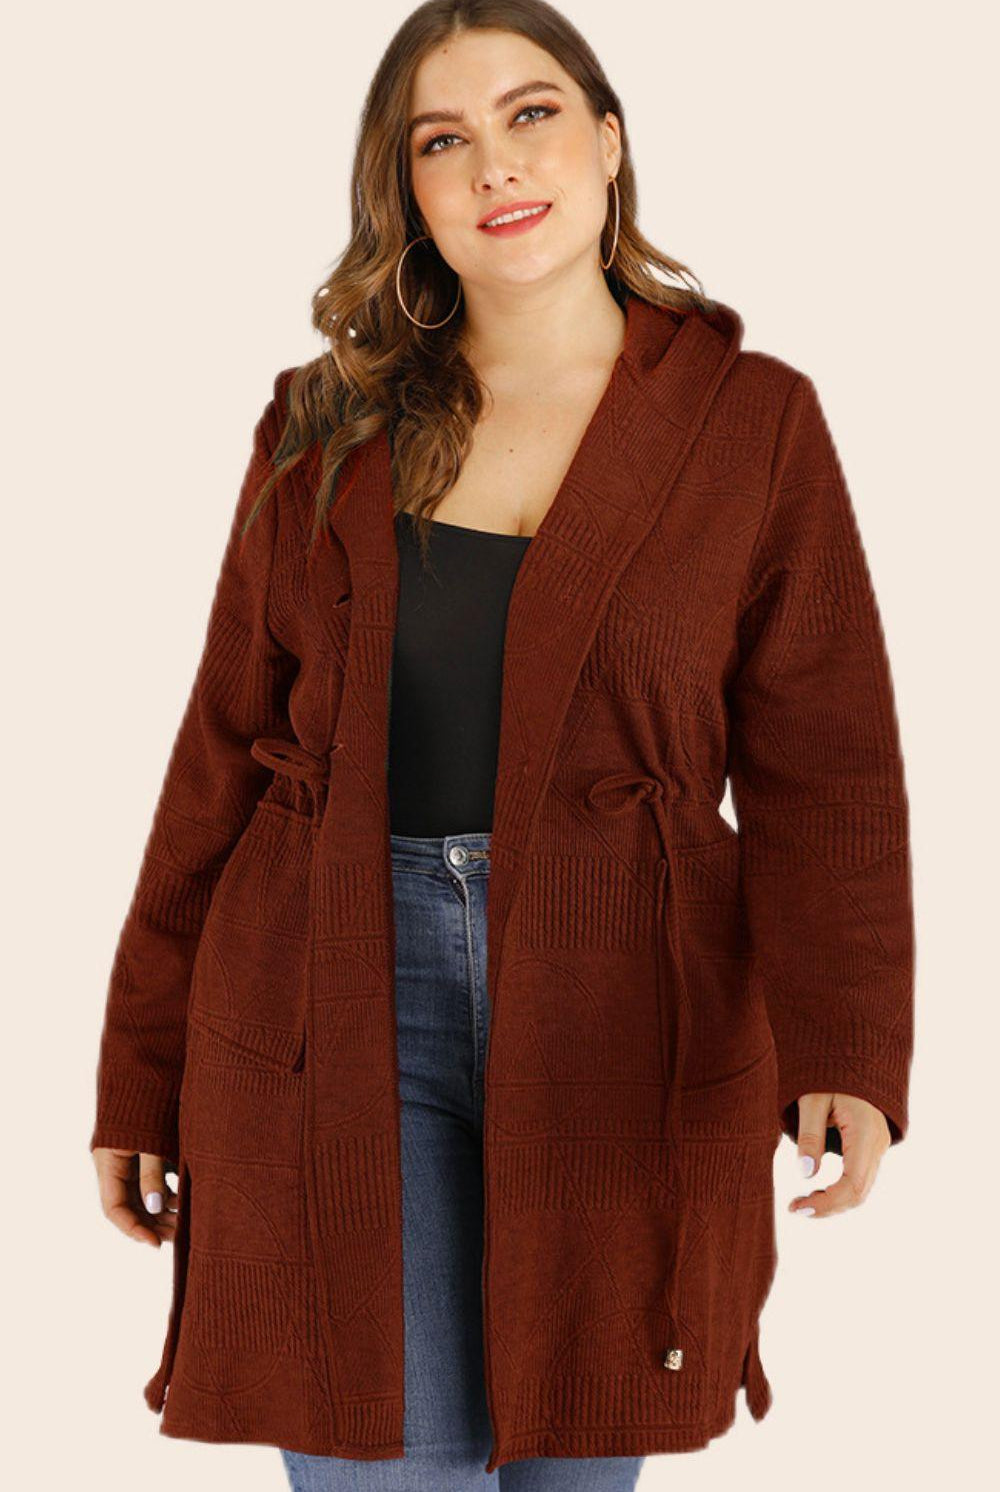 Women's Sweaters - Cardigans Plus Size Drawstring Waist Hooded Cardigan With Pockets